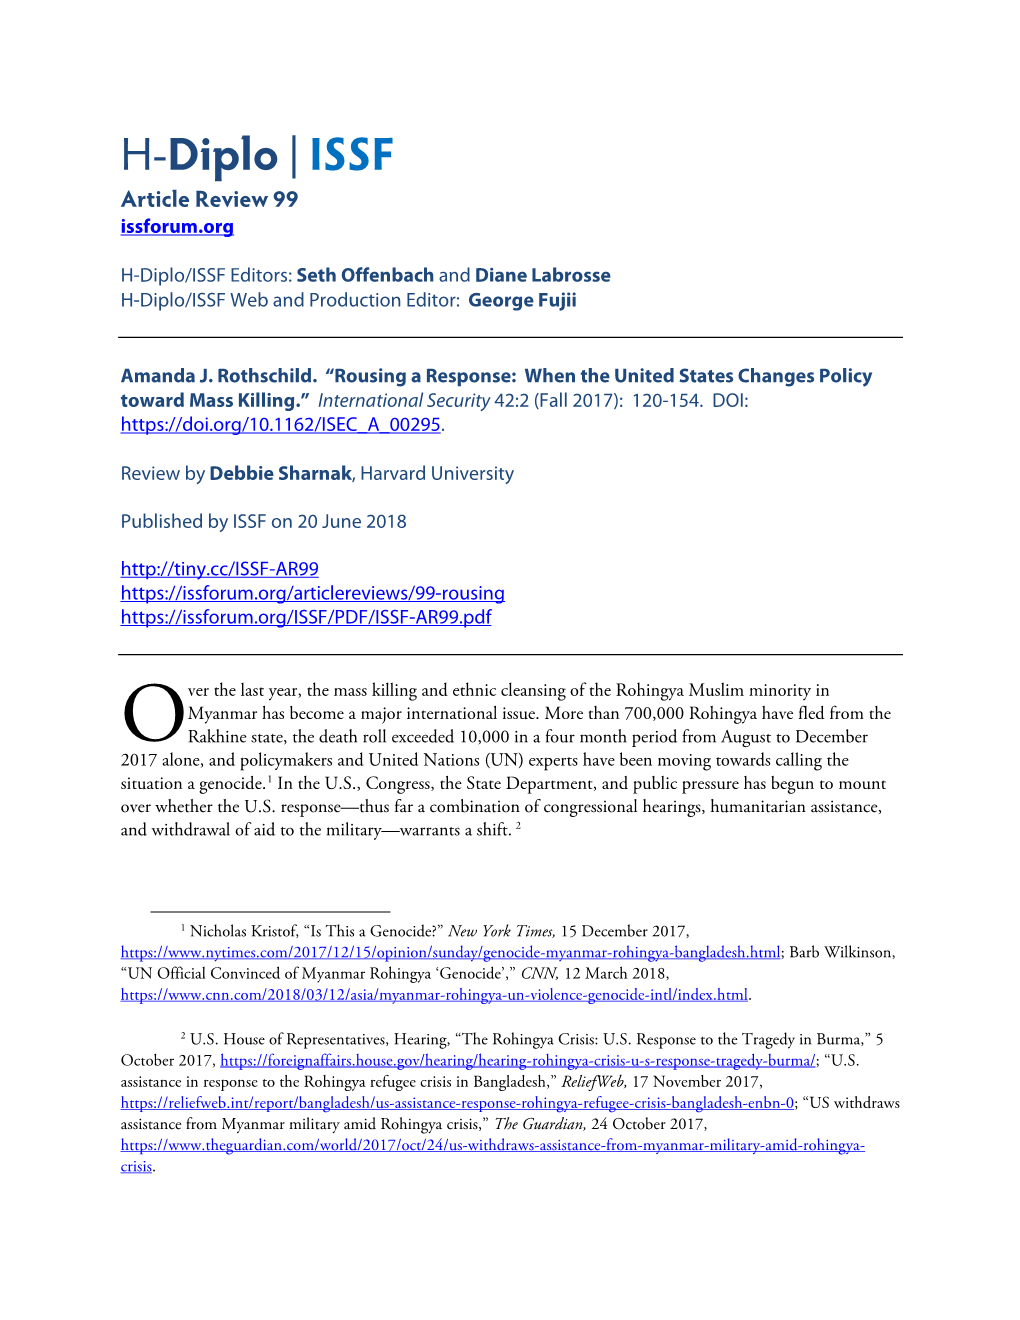 H-Diplo | ISSF Article Review 99 Issforum.Org